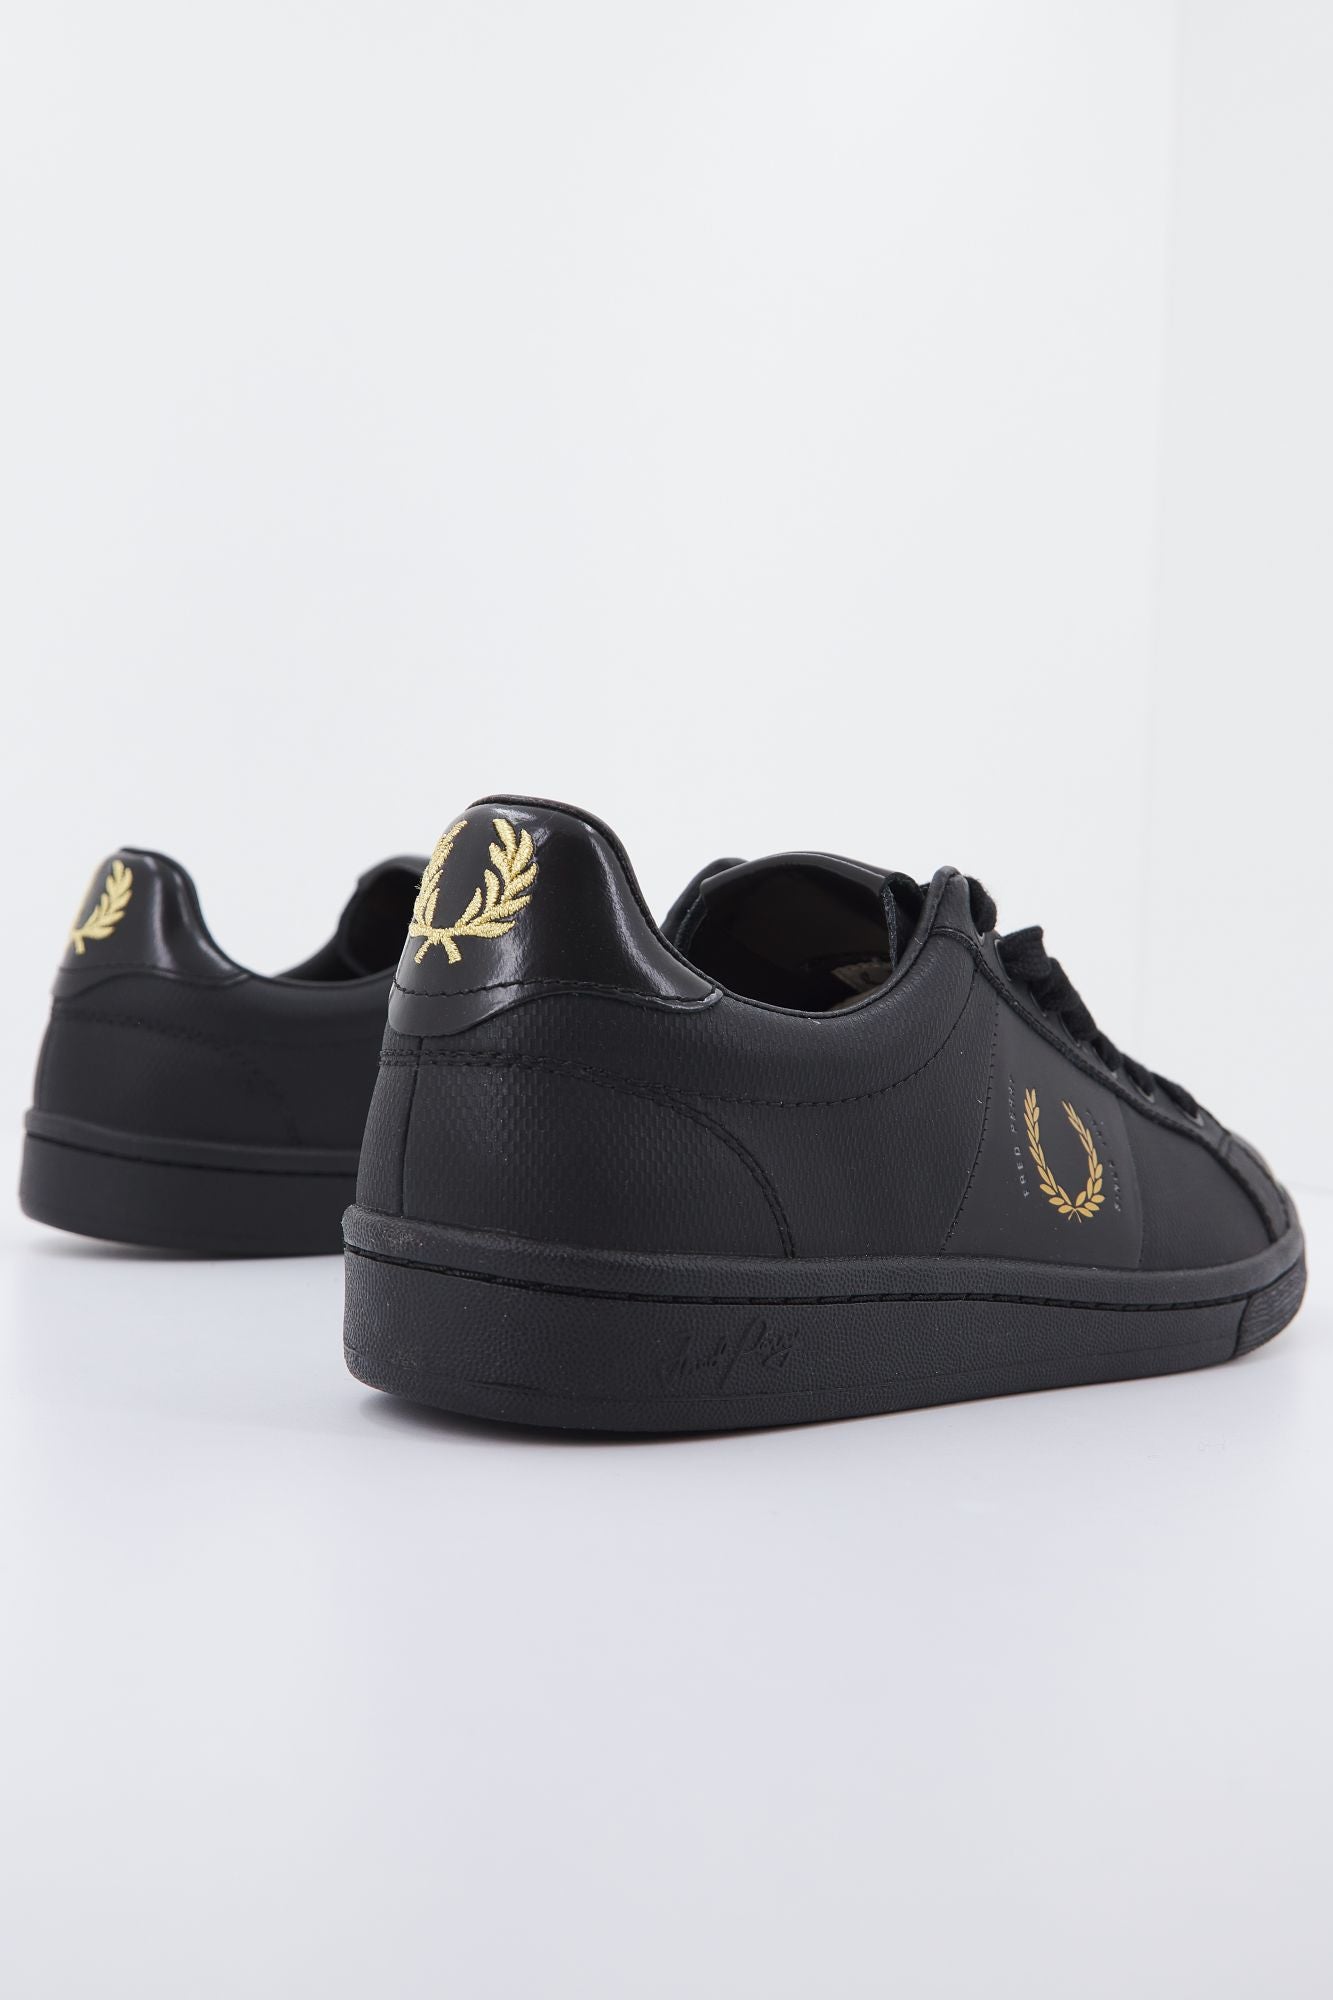 FRED PERRY B2341 en color NEGRO (2)